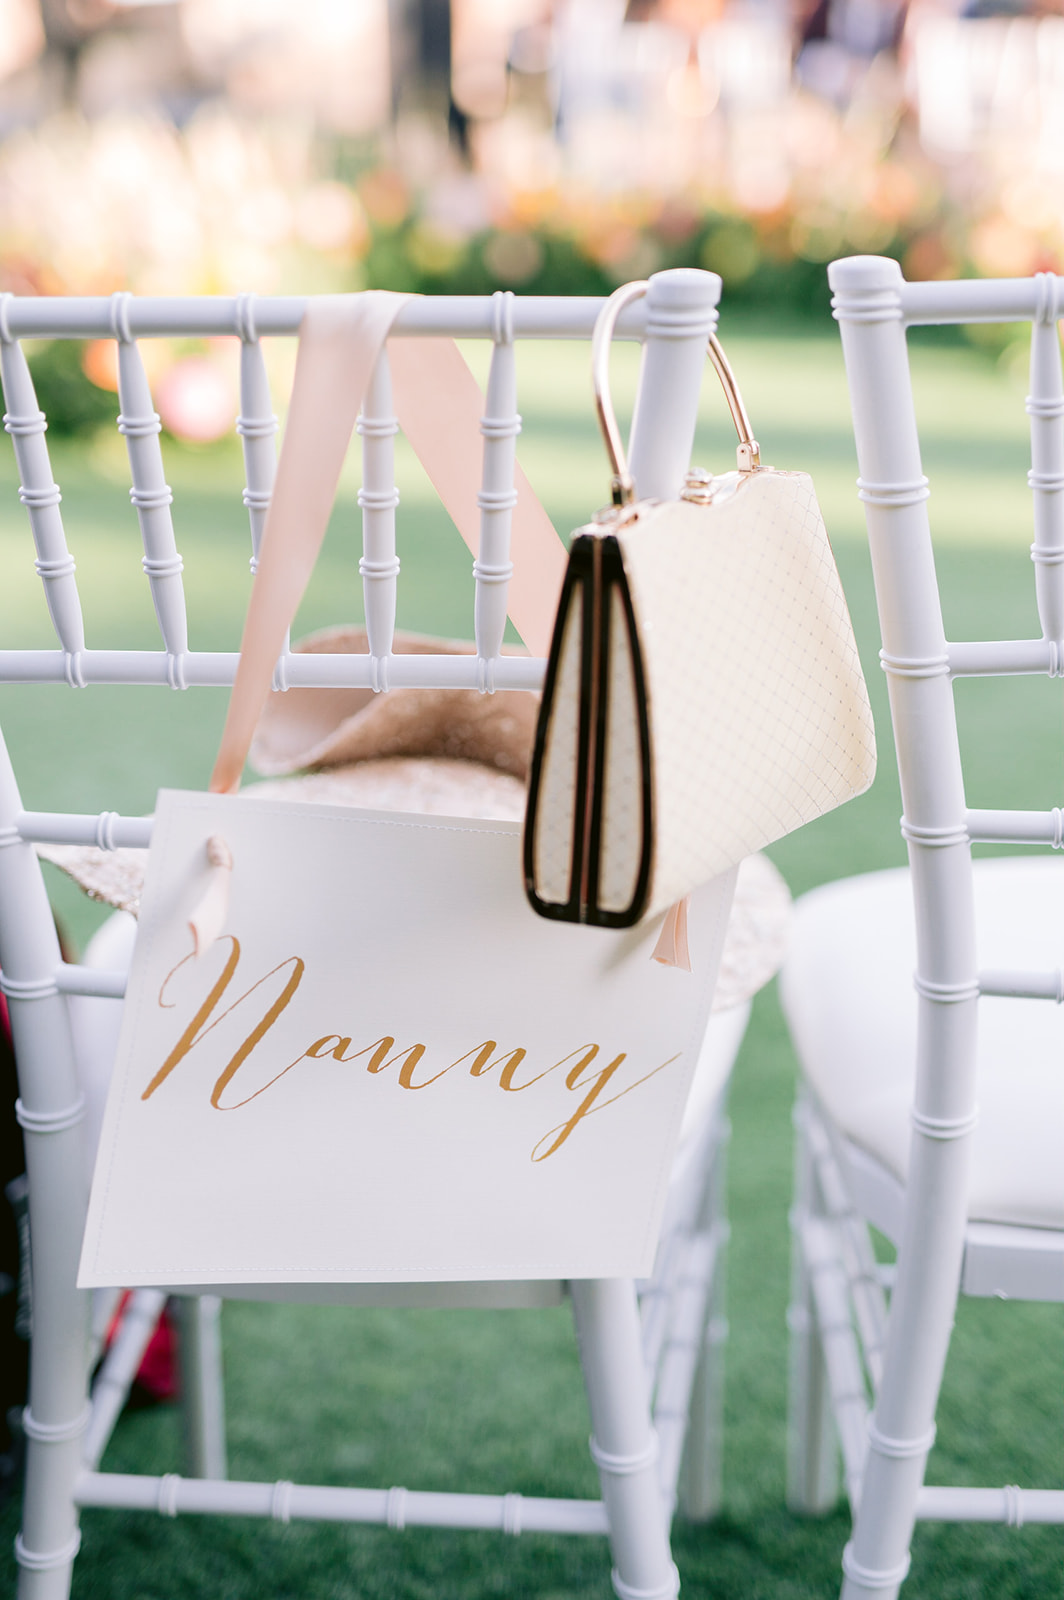 Reserved wedding ceremony seat for the bride's late 'Nanny'